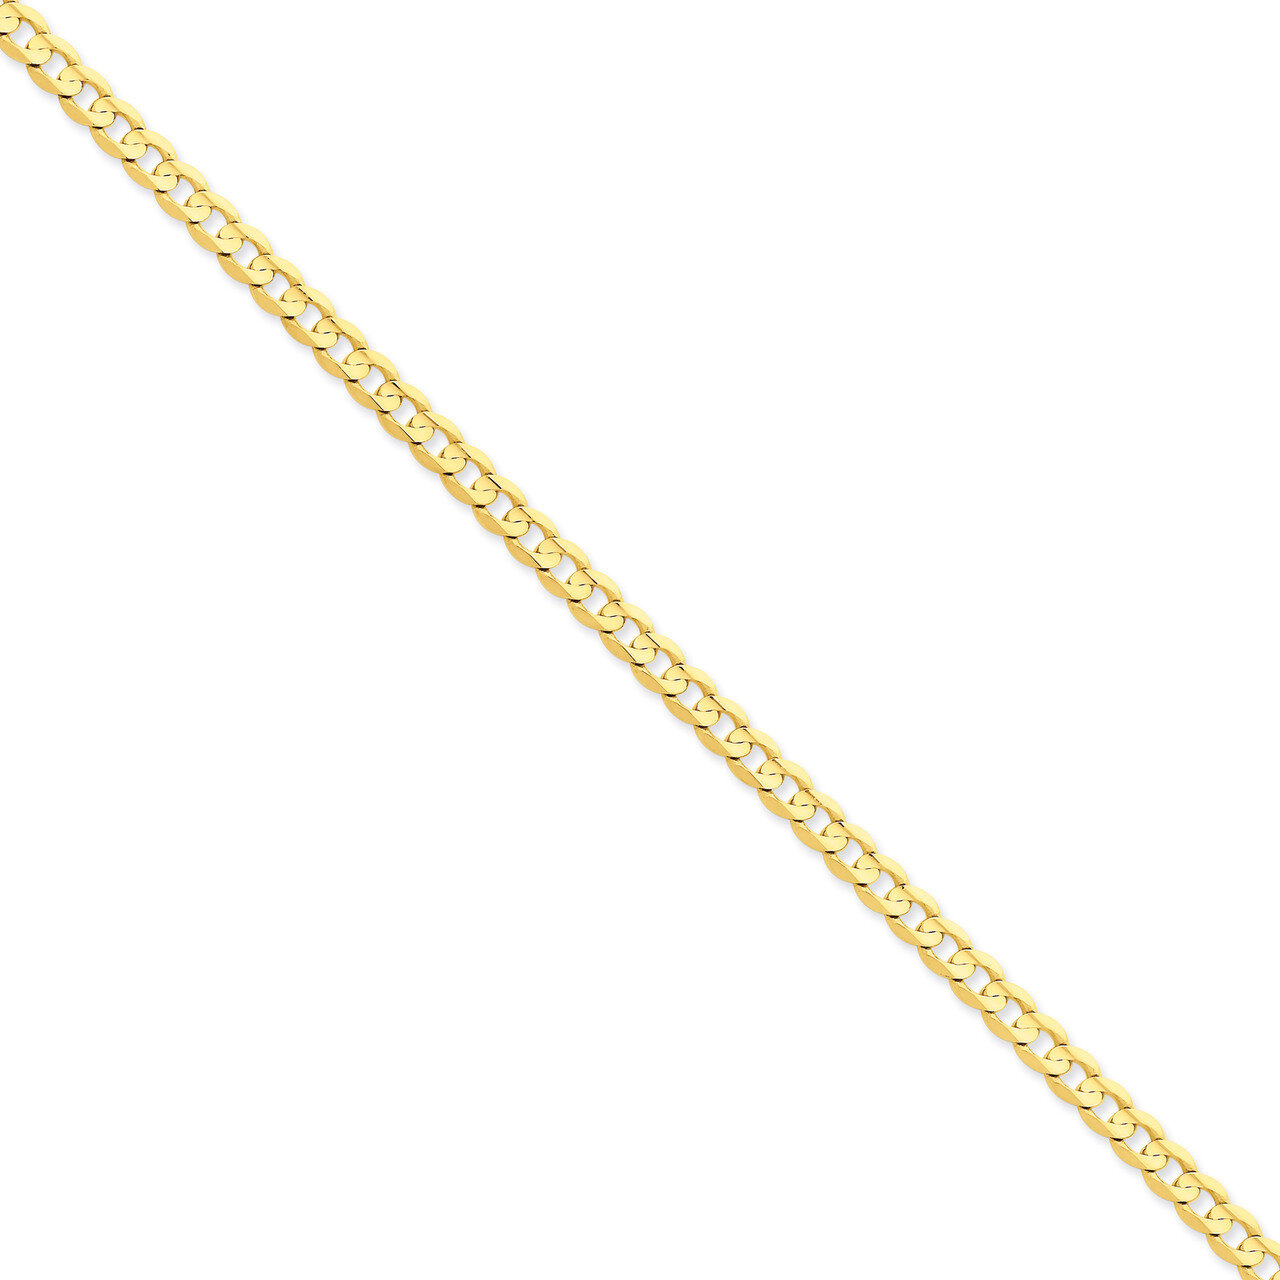 5.25mm Open Concave Curb Chain 16 Inch 14k Gold LCR140-16